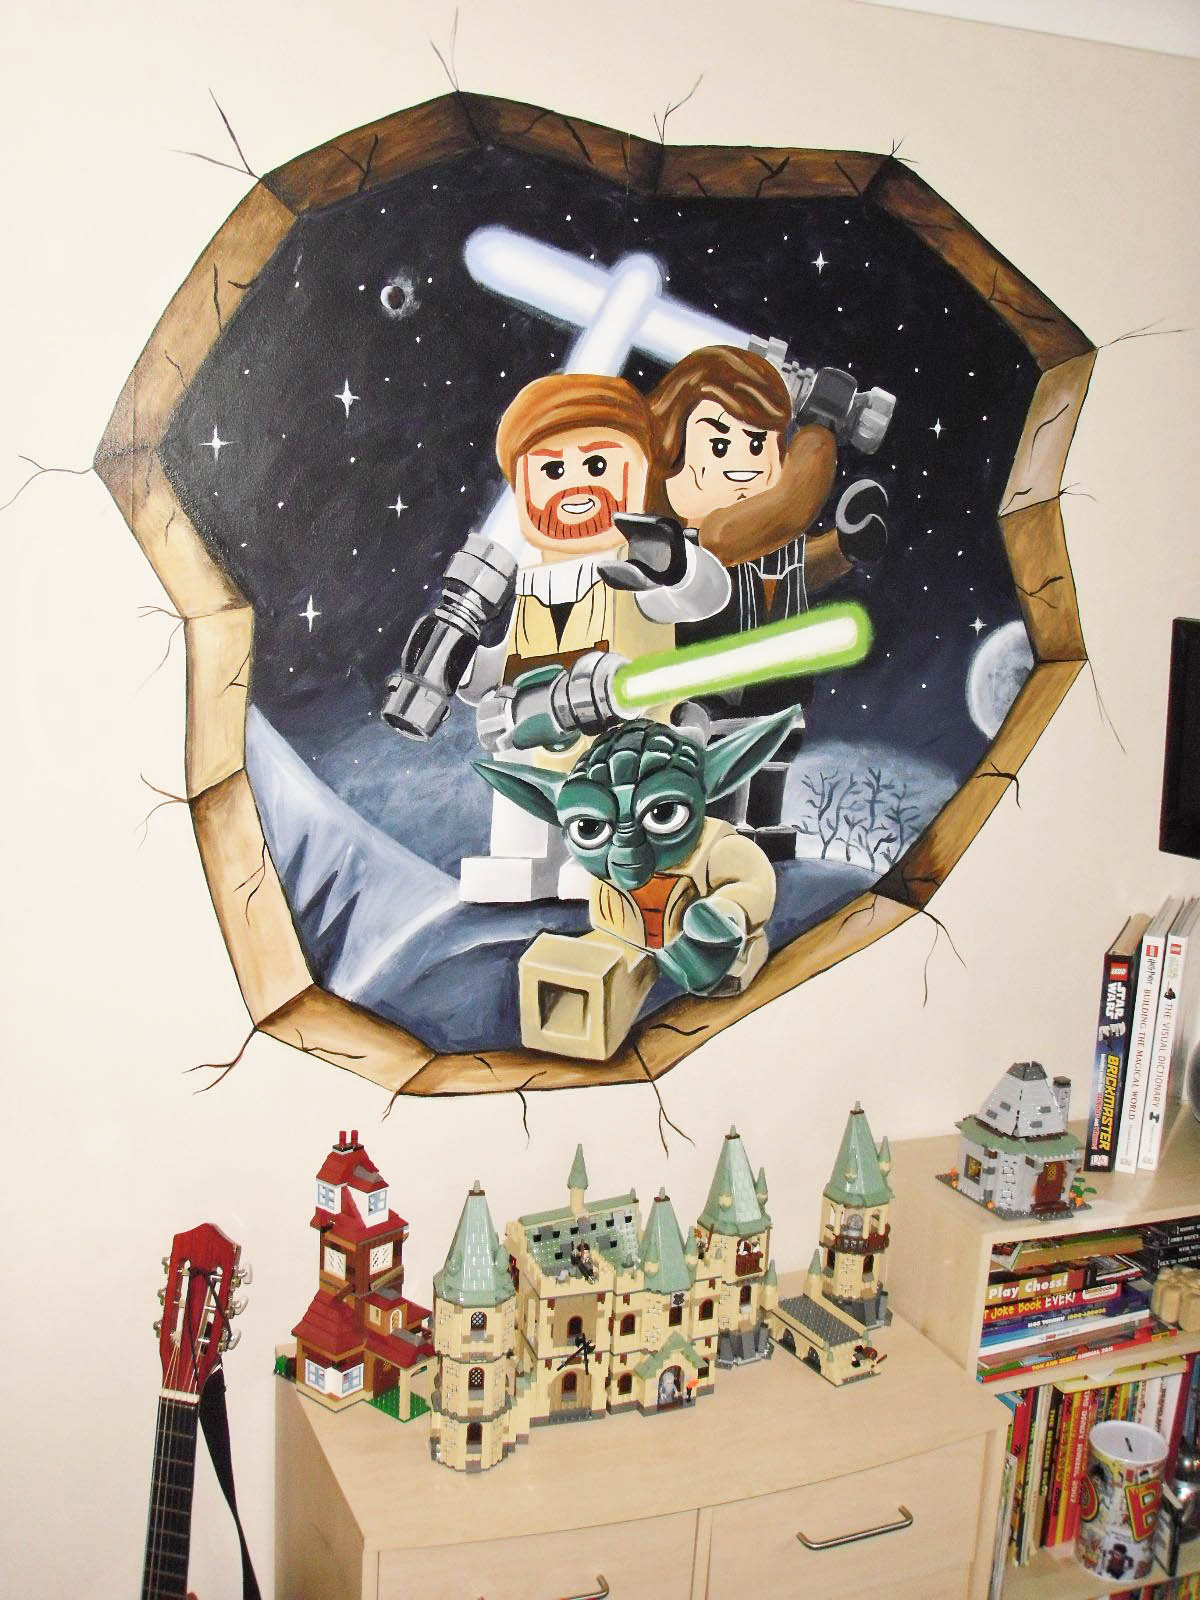 It doesn't have to cost a lot of money to bring out the Star Wars and you, just put up a vinyl Lego Star Wars Breakaway Wall sticker and you're good to go!